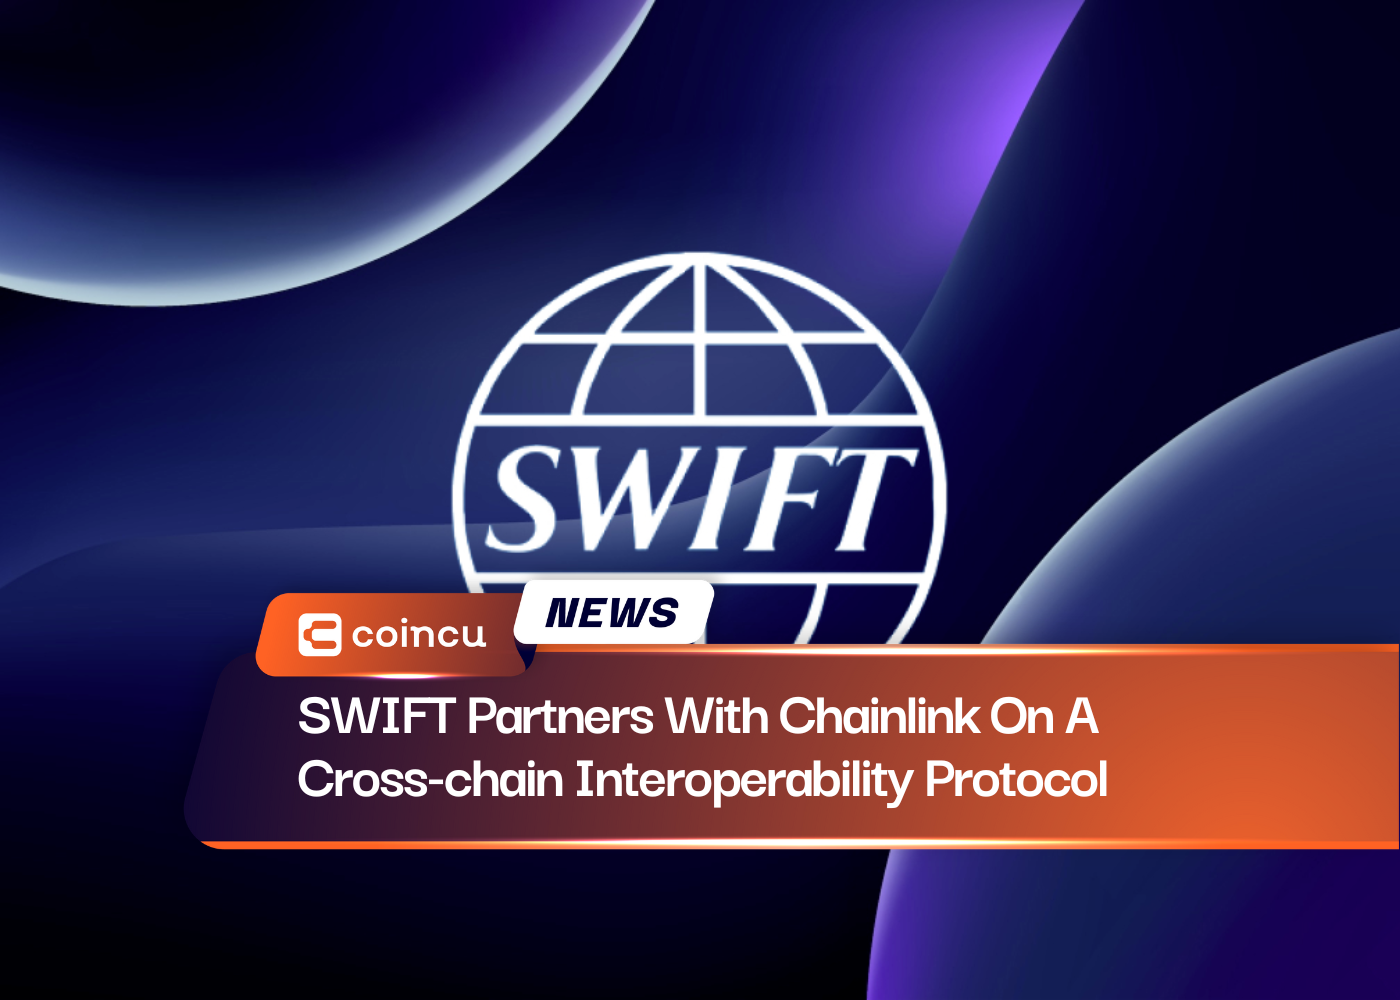 SWIFT Partners With Chainlink On A Cross-chain Interoperability Protocol